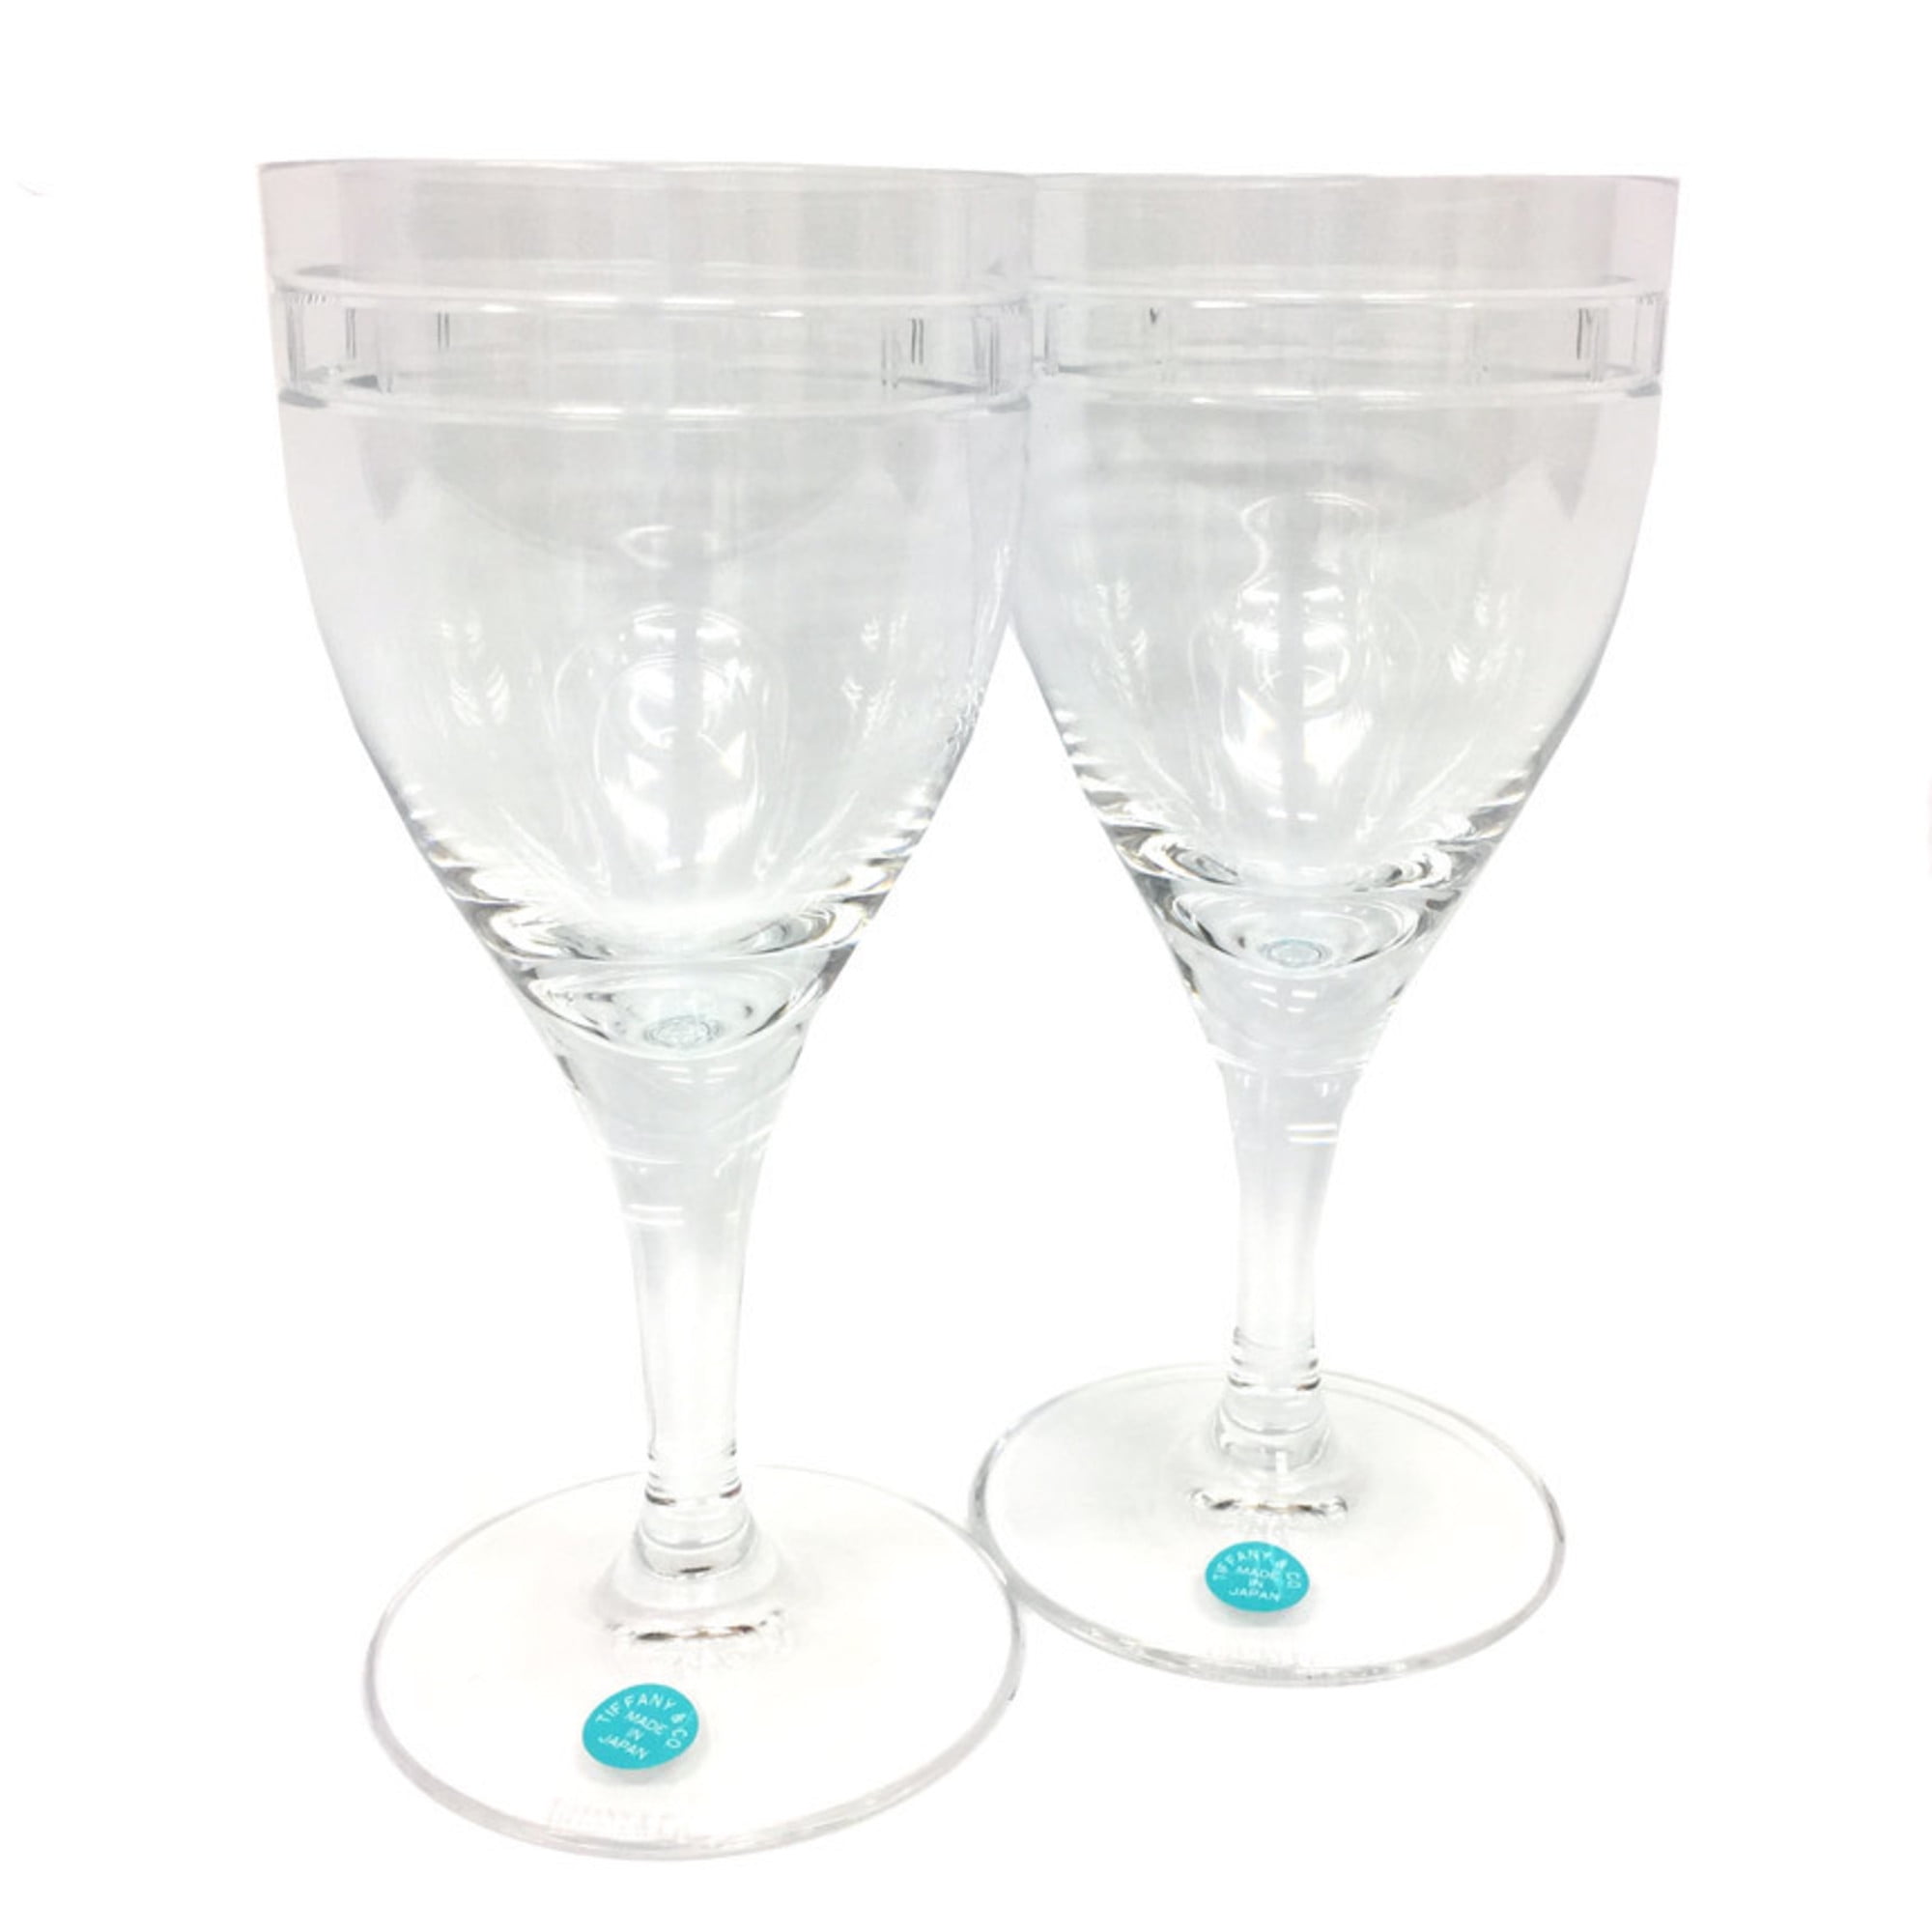 One pair of ATLAS martini glasses by Waterford